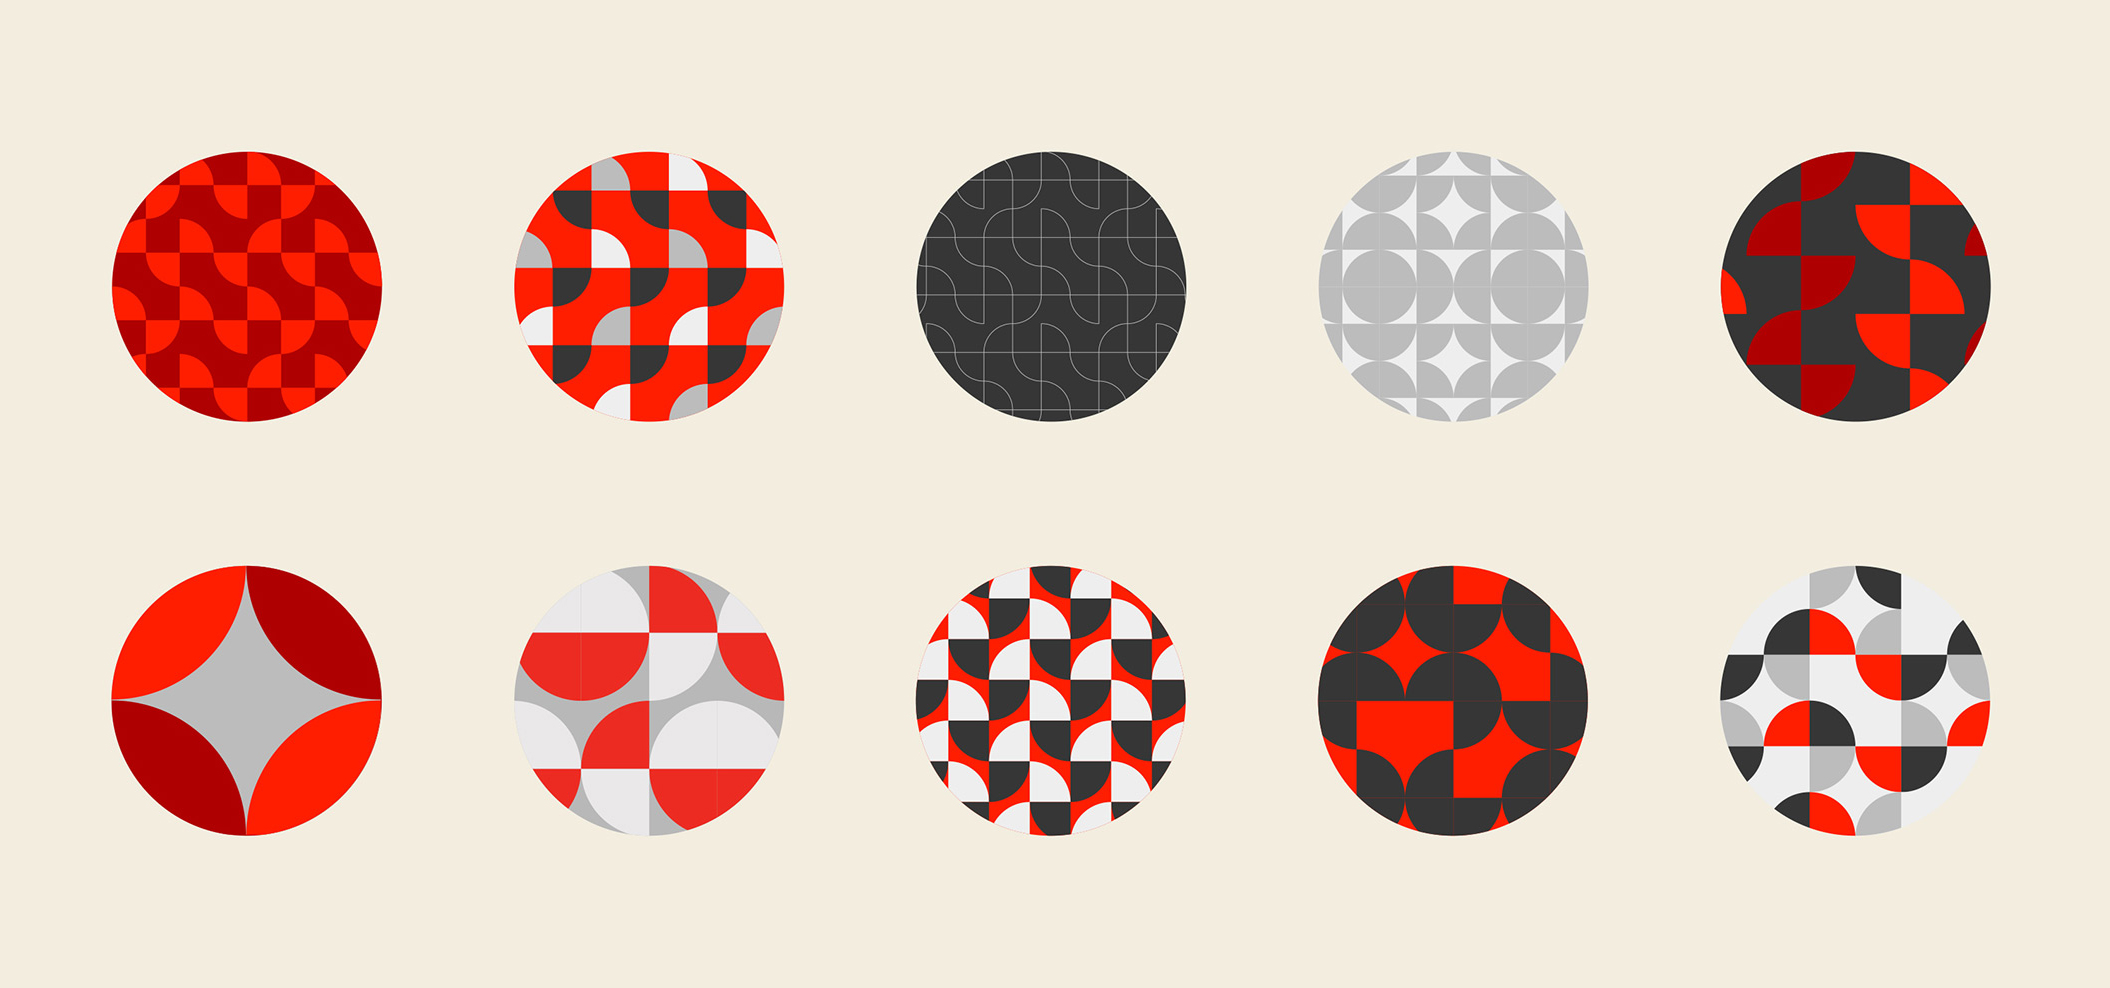 10 circles with patterns made out of soren west logo